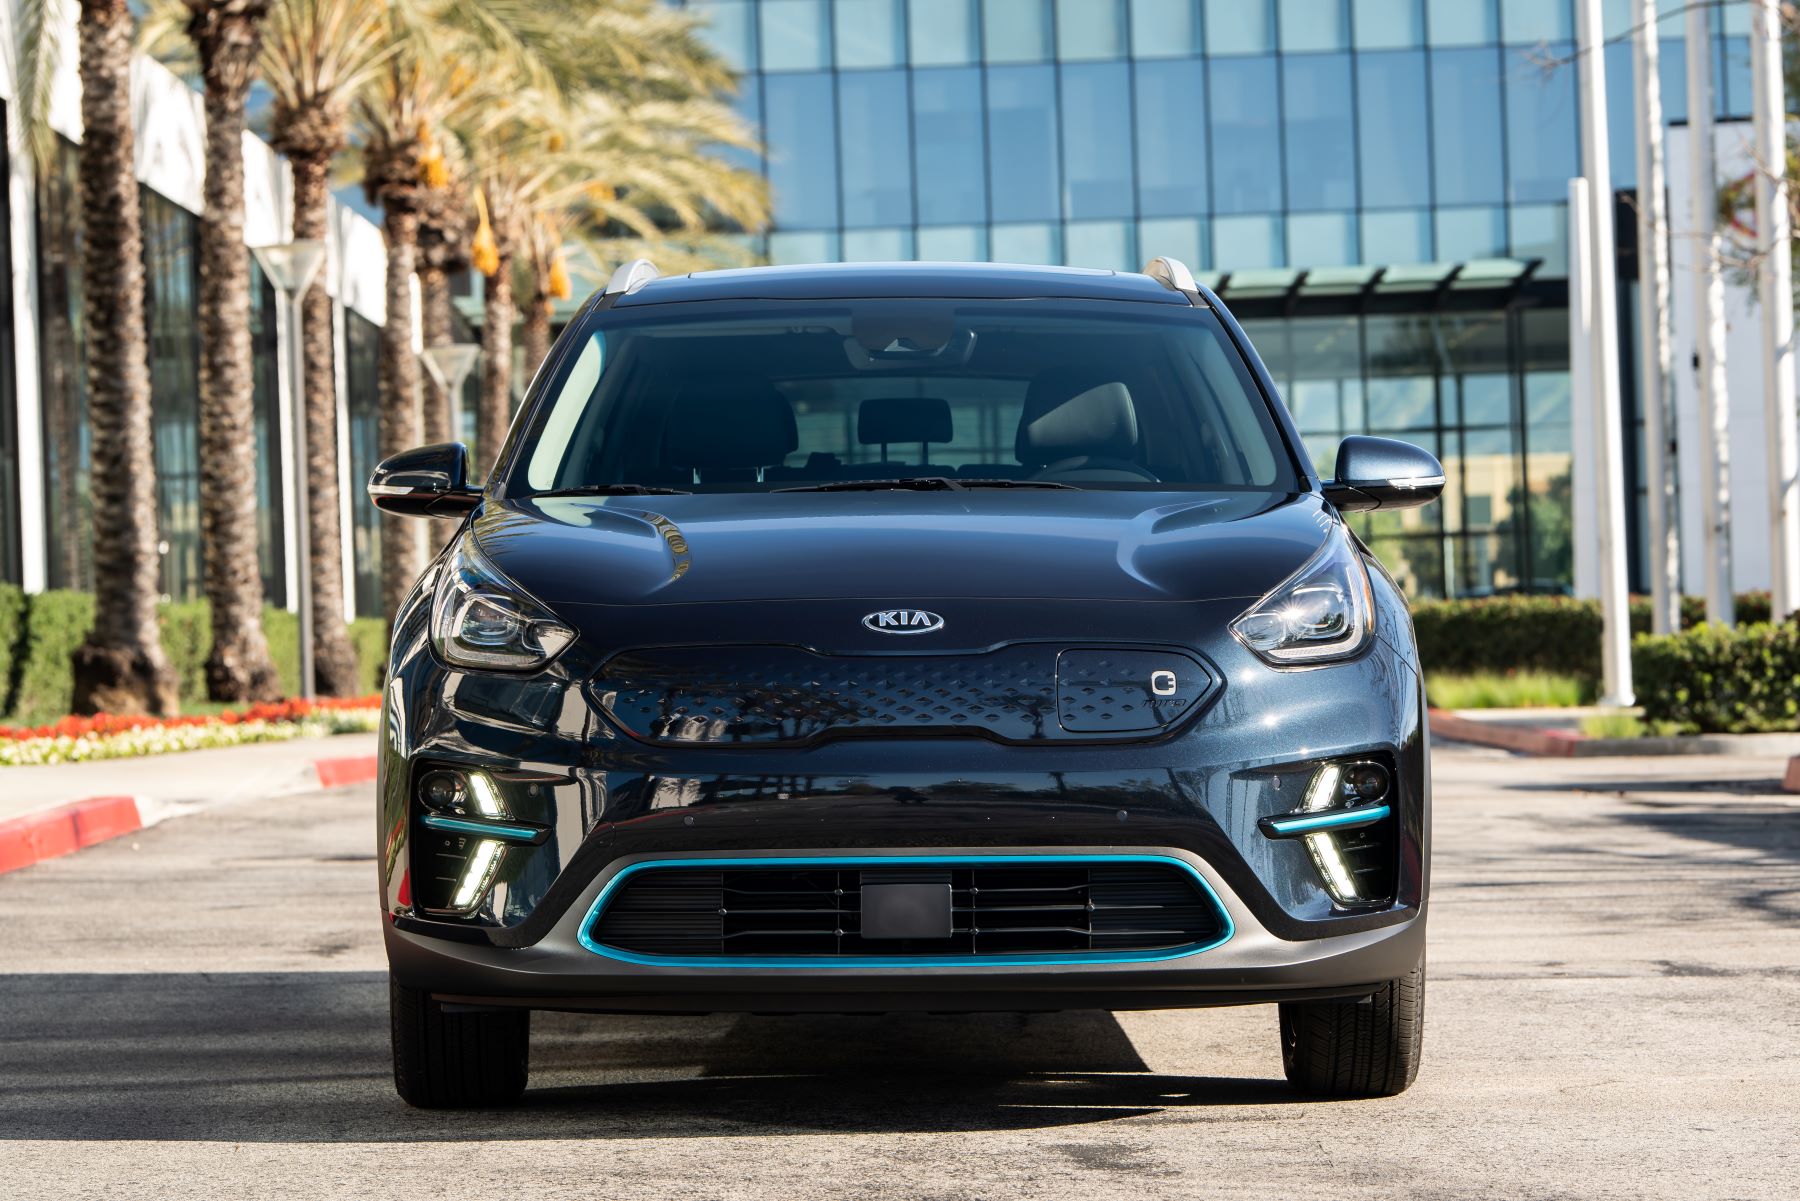 A front-facing 2019 Kia Niro Electric/EV parked outside a glass office building near a line of palm trees